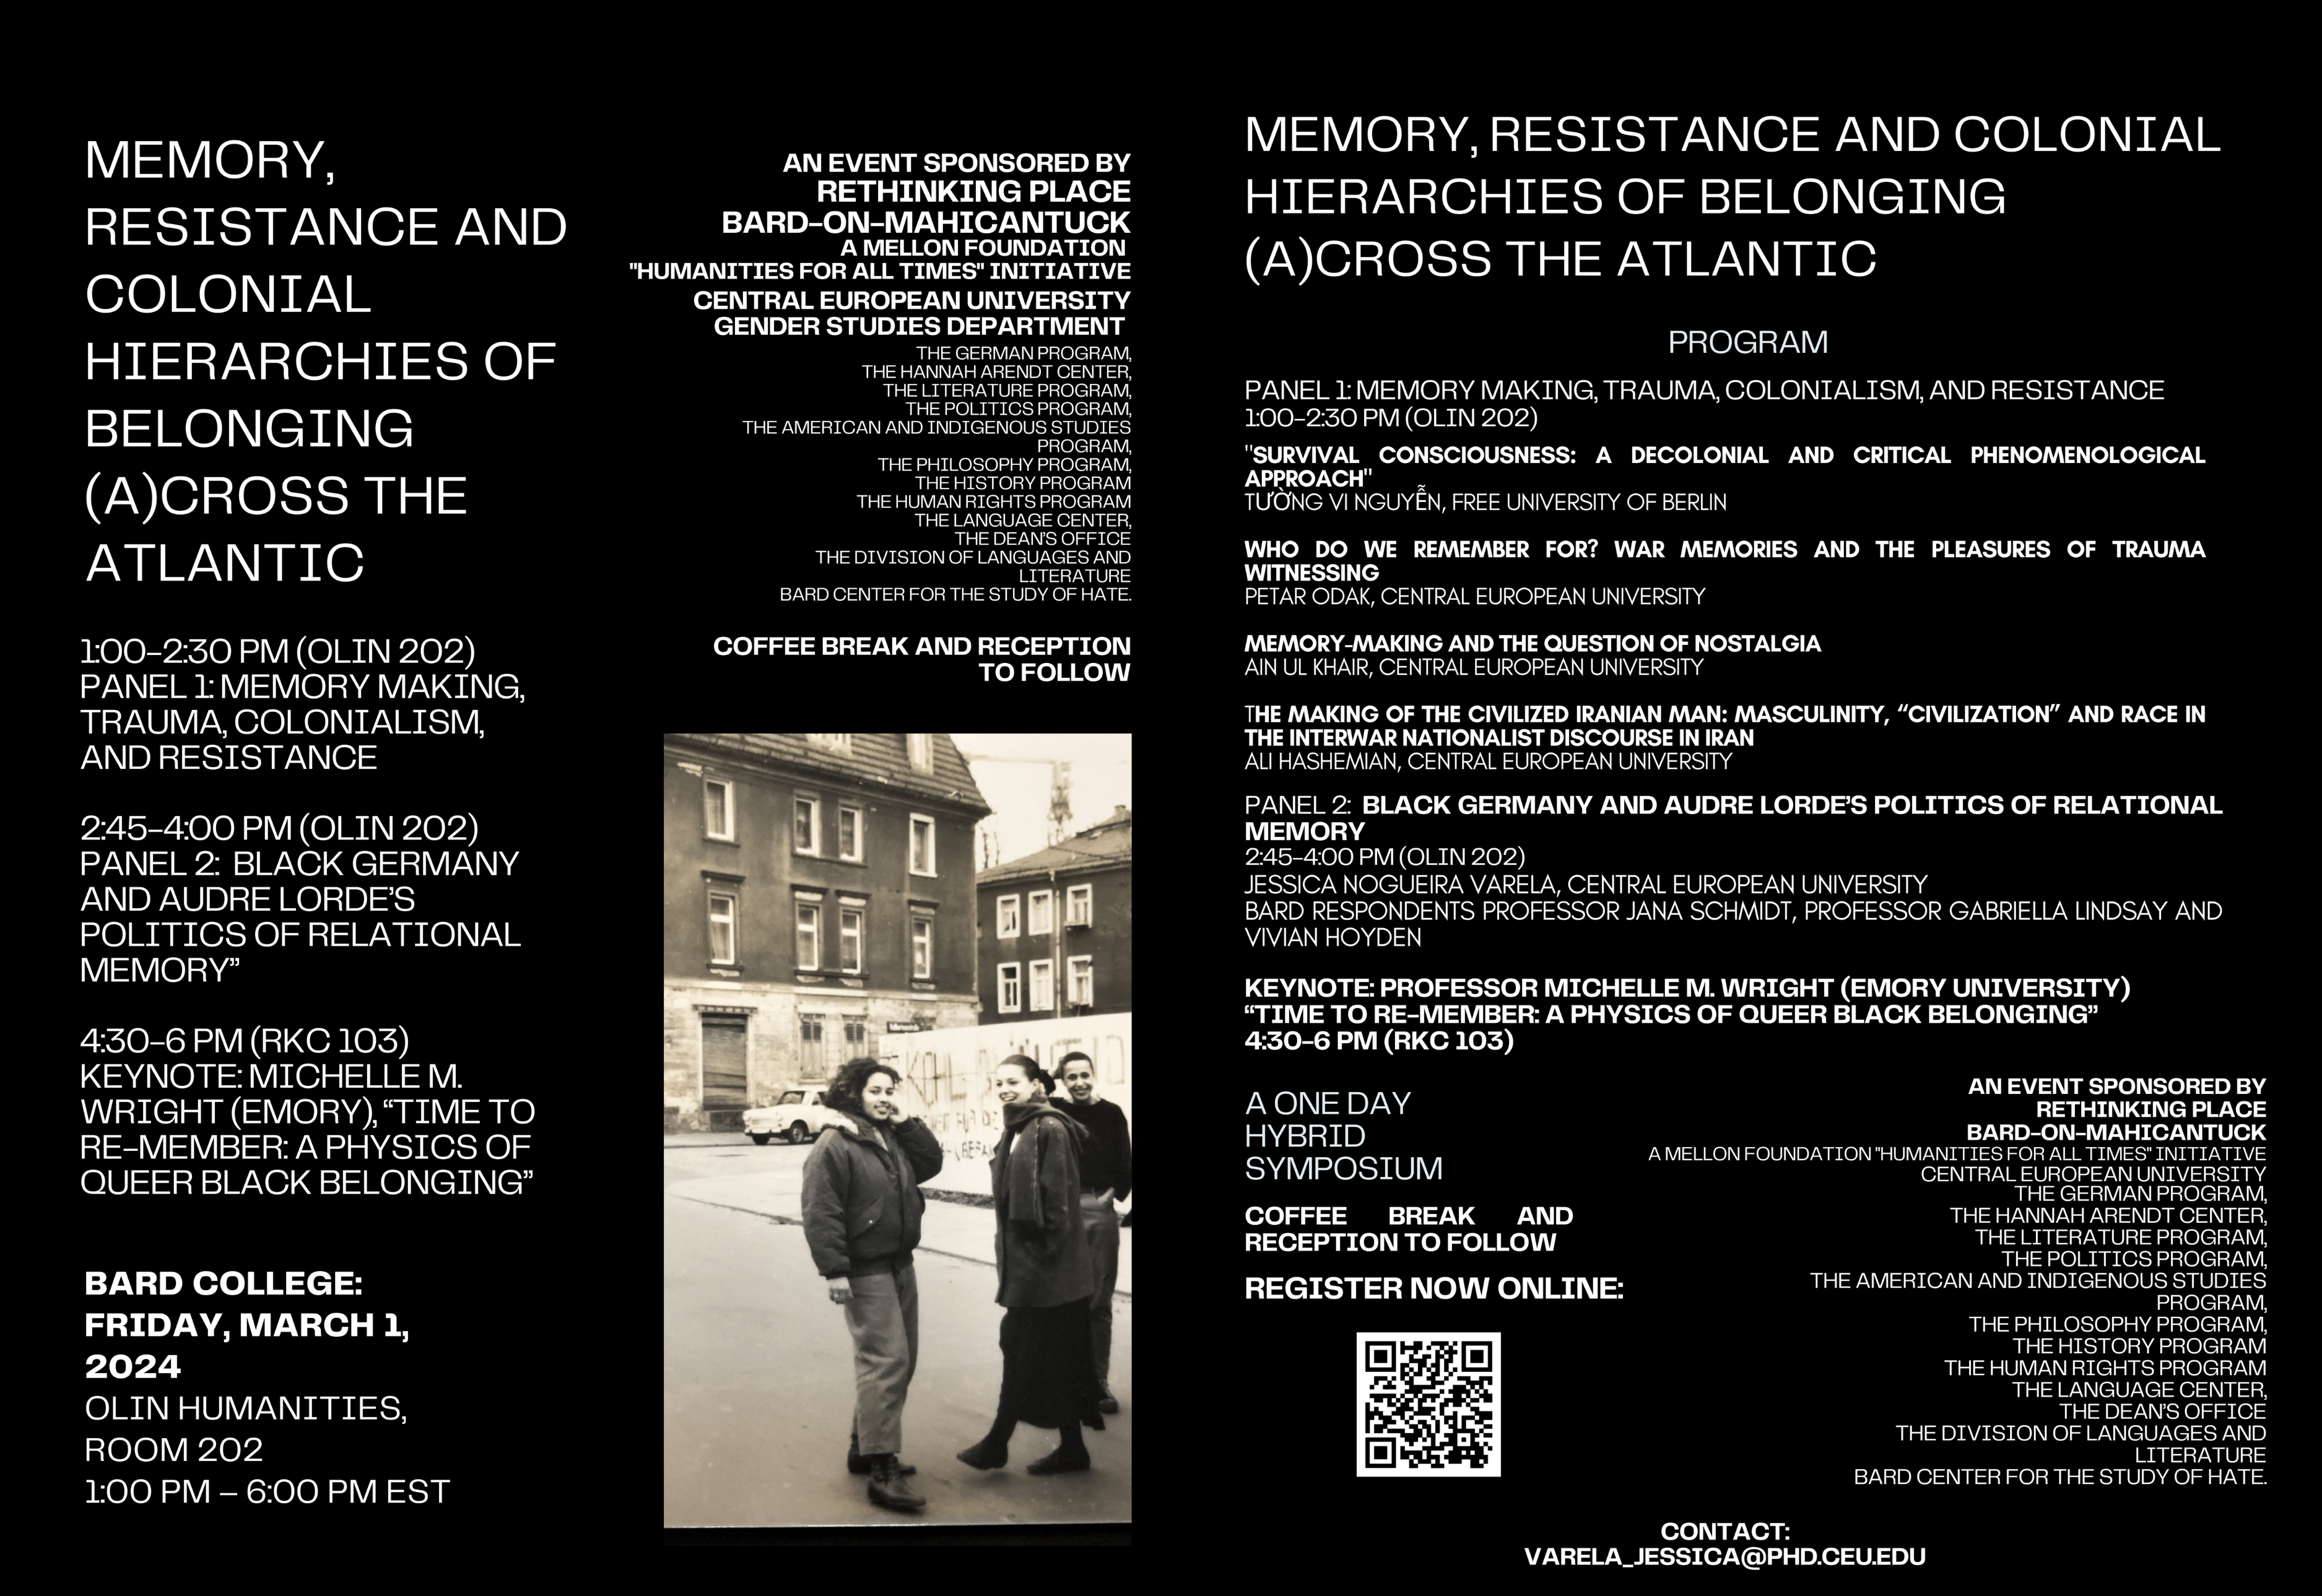 Memory, Resistance, and Colonial Hierarchies of Belonging (A)cross the Atlantic